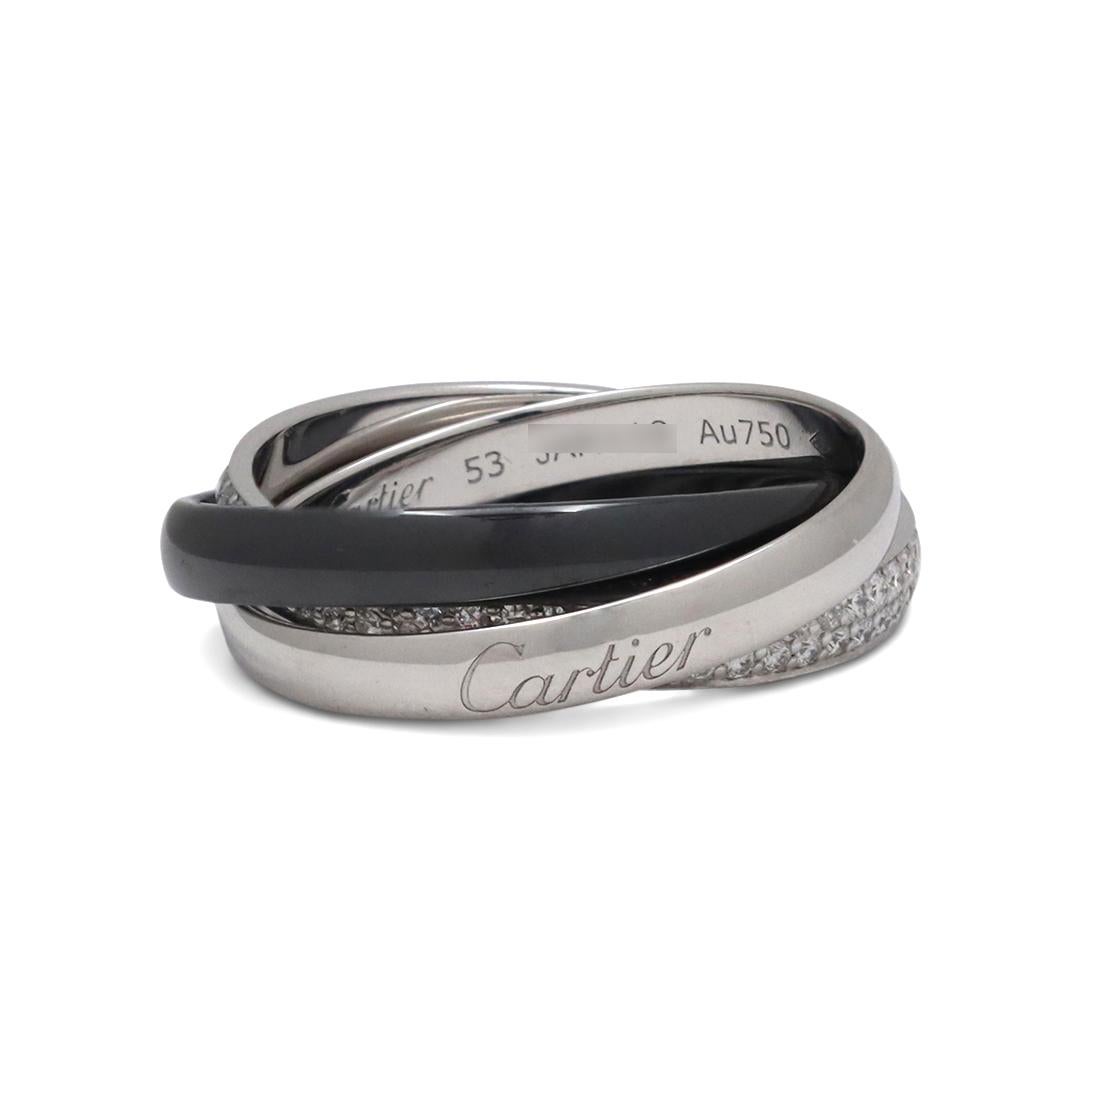 Authentic Cartier 'Trinity' ring comprised of interlocking bands of 18 karat white gold and black ceramic. One white gold band is pave set with an estimated 1 carat of high quality (G-H color, VS clarity) diamonds. Each band measures 3.3 mm in